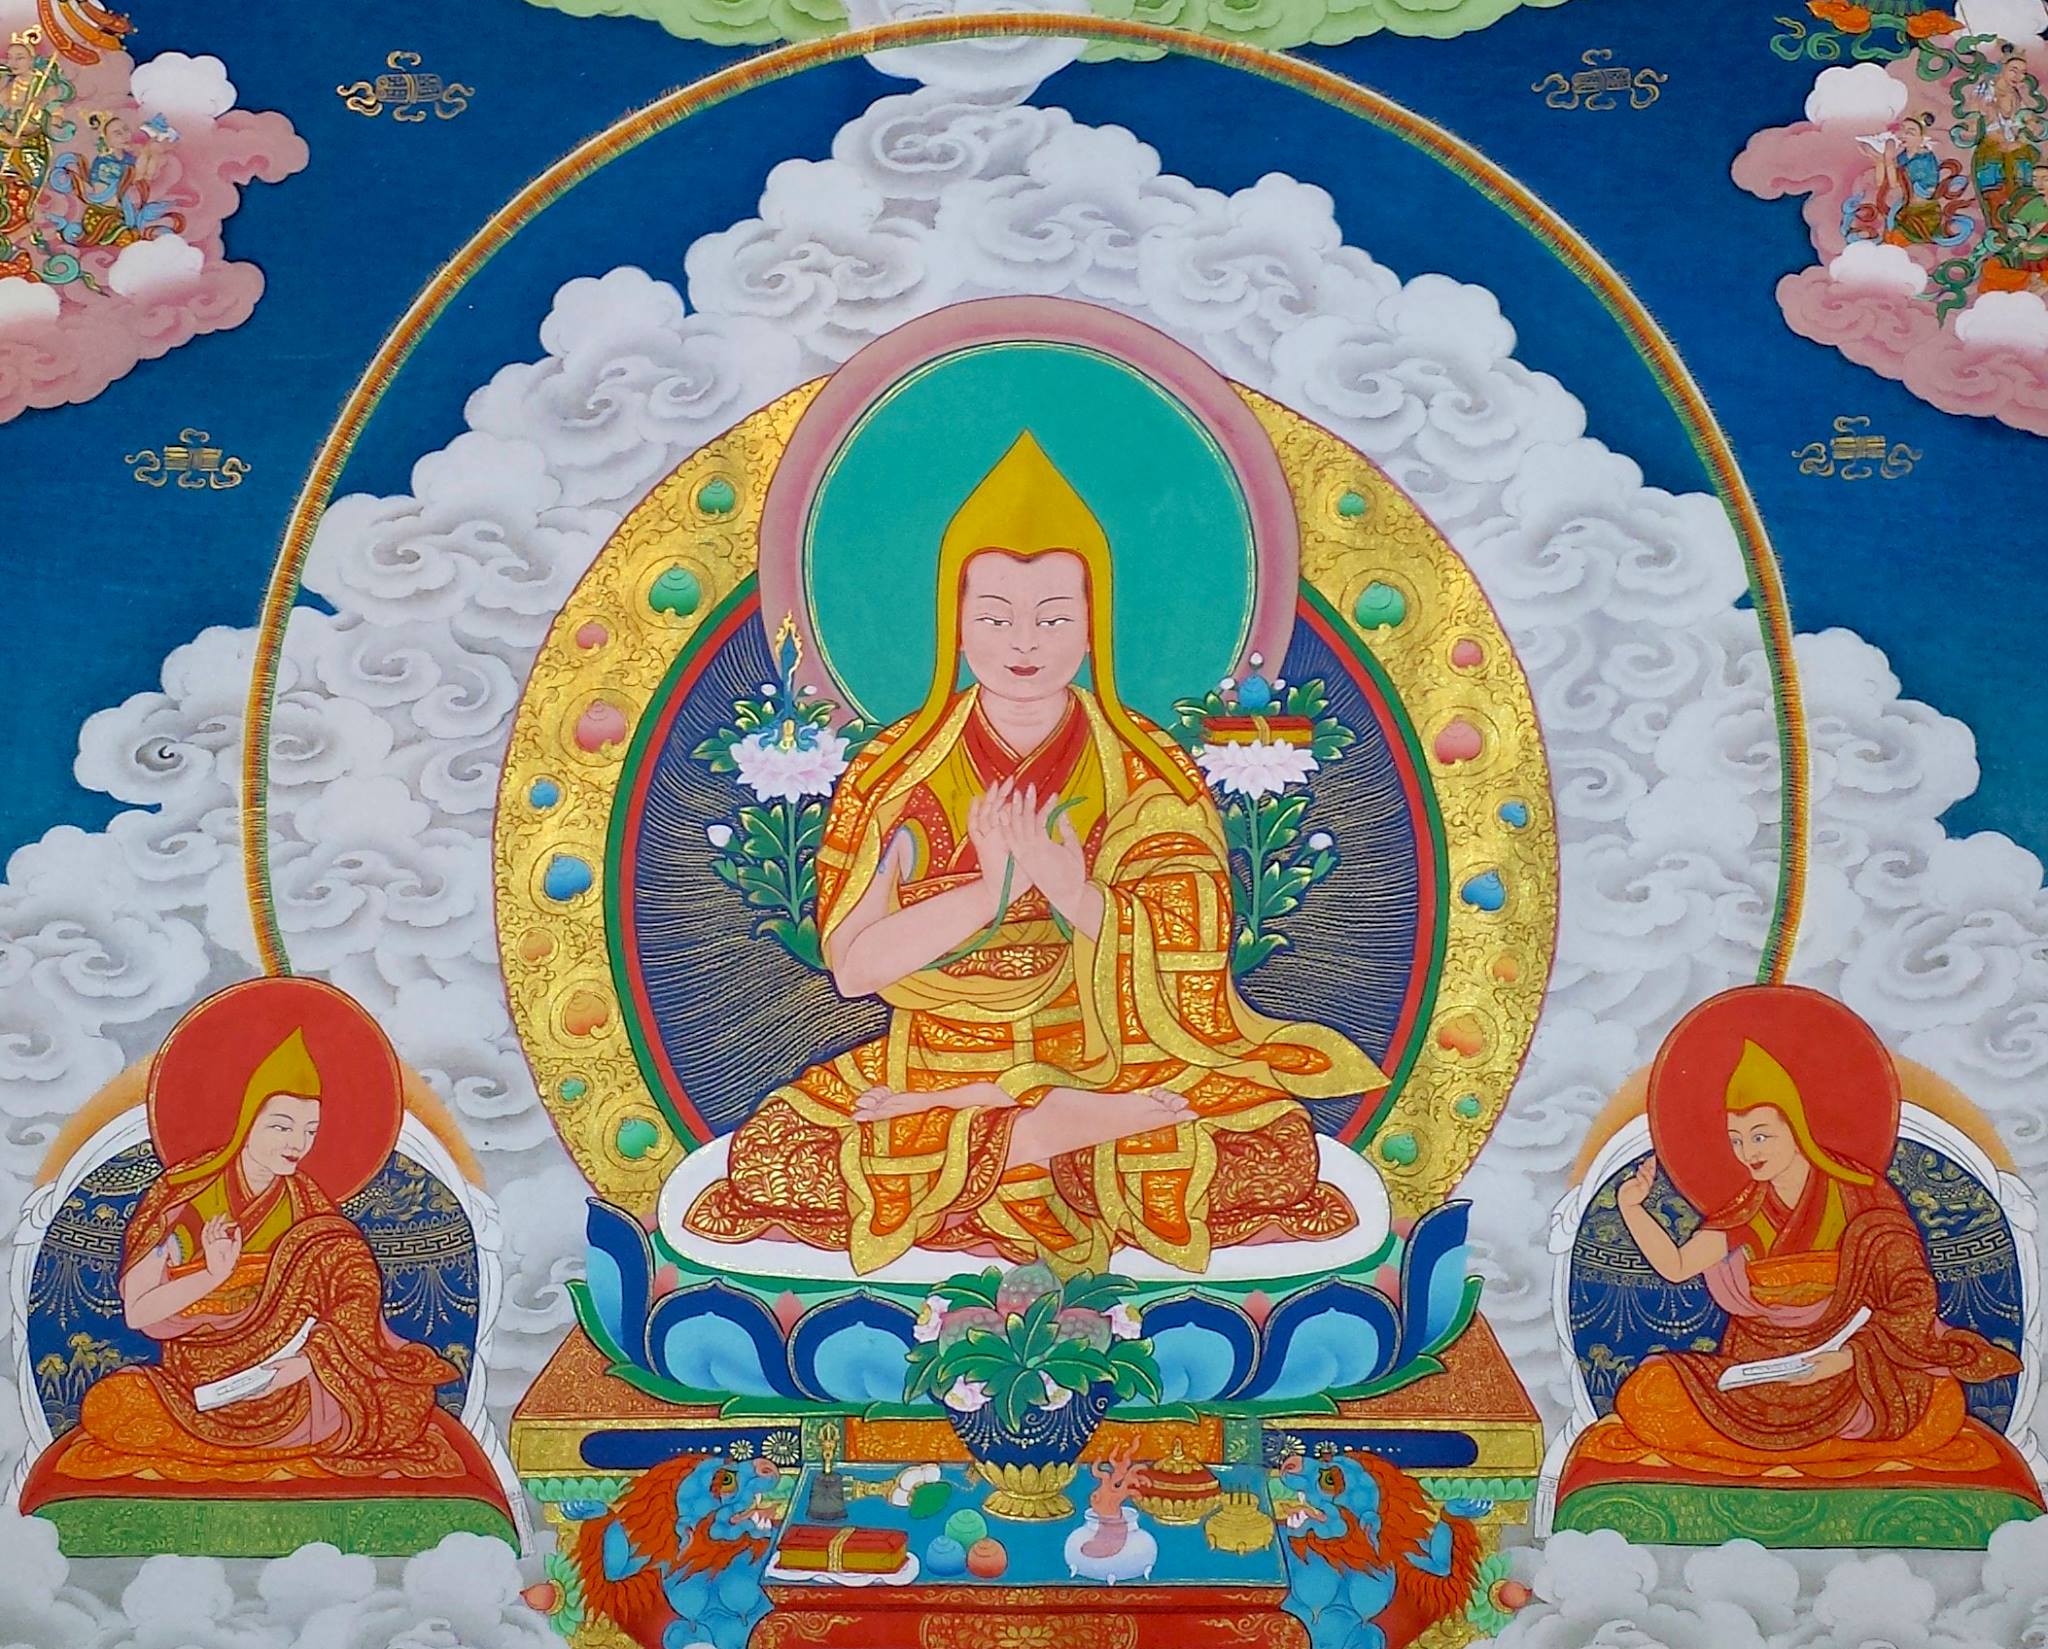 Lama Je Tsongkhapa: May the bliss of the mystical fusion of transcendent wisdom with tender compassion fall like sweet summer rain from dark blue clouds